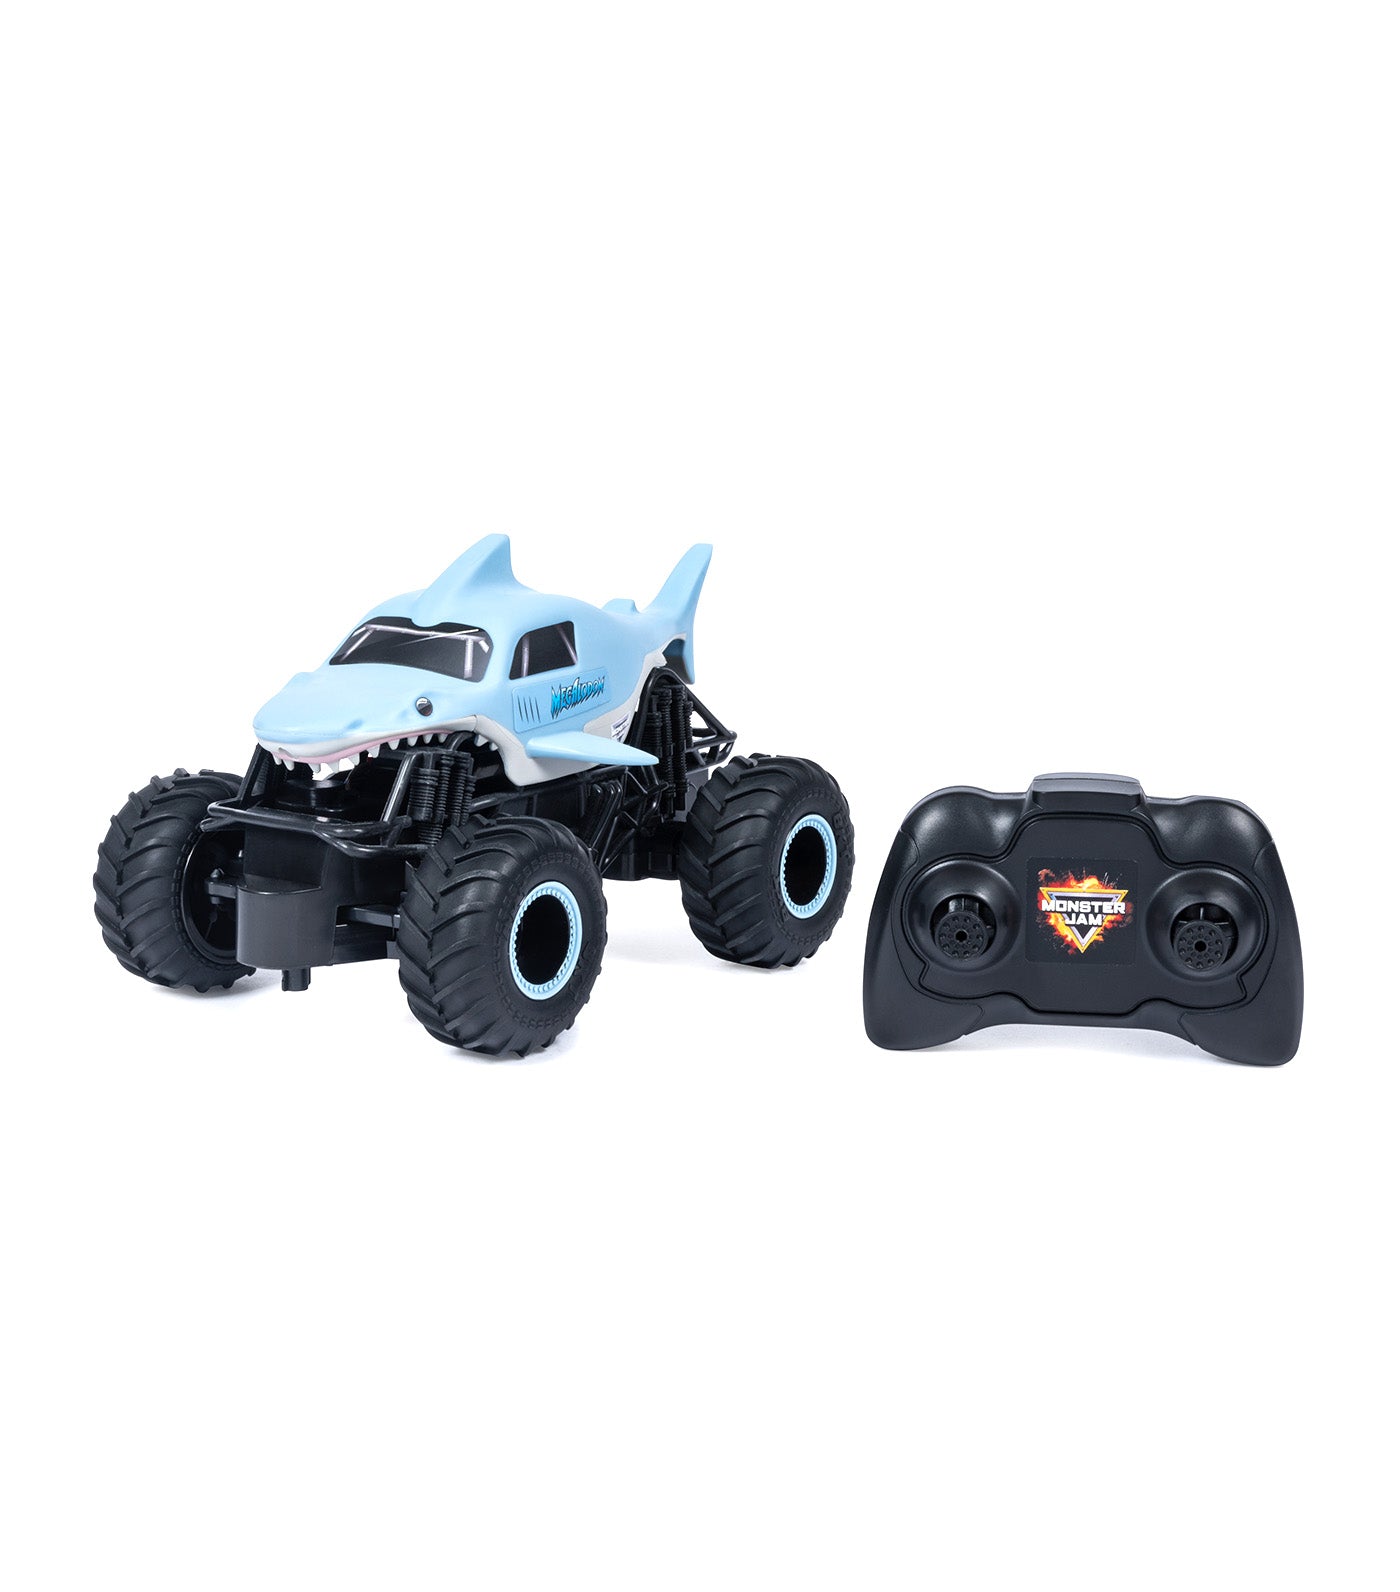 Megalodon Remote Control Monster Truck